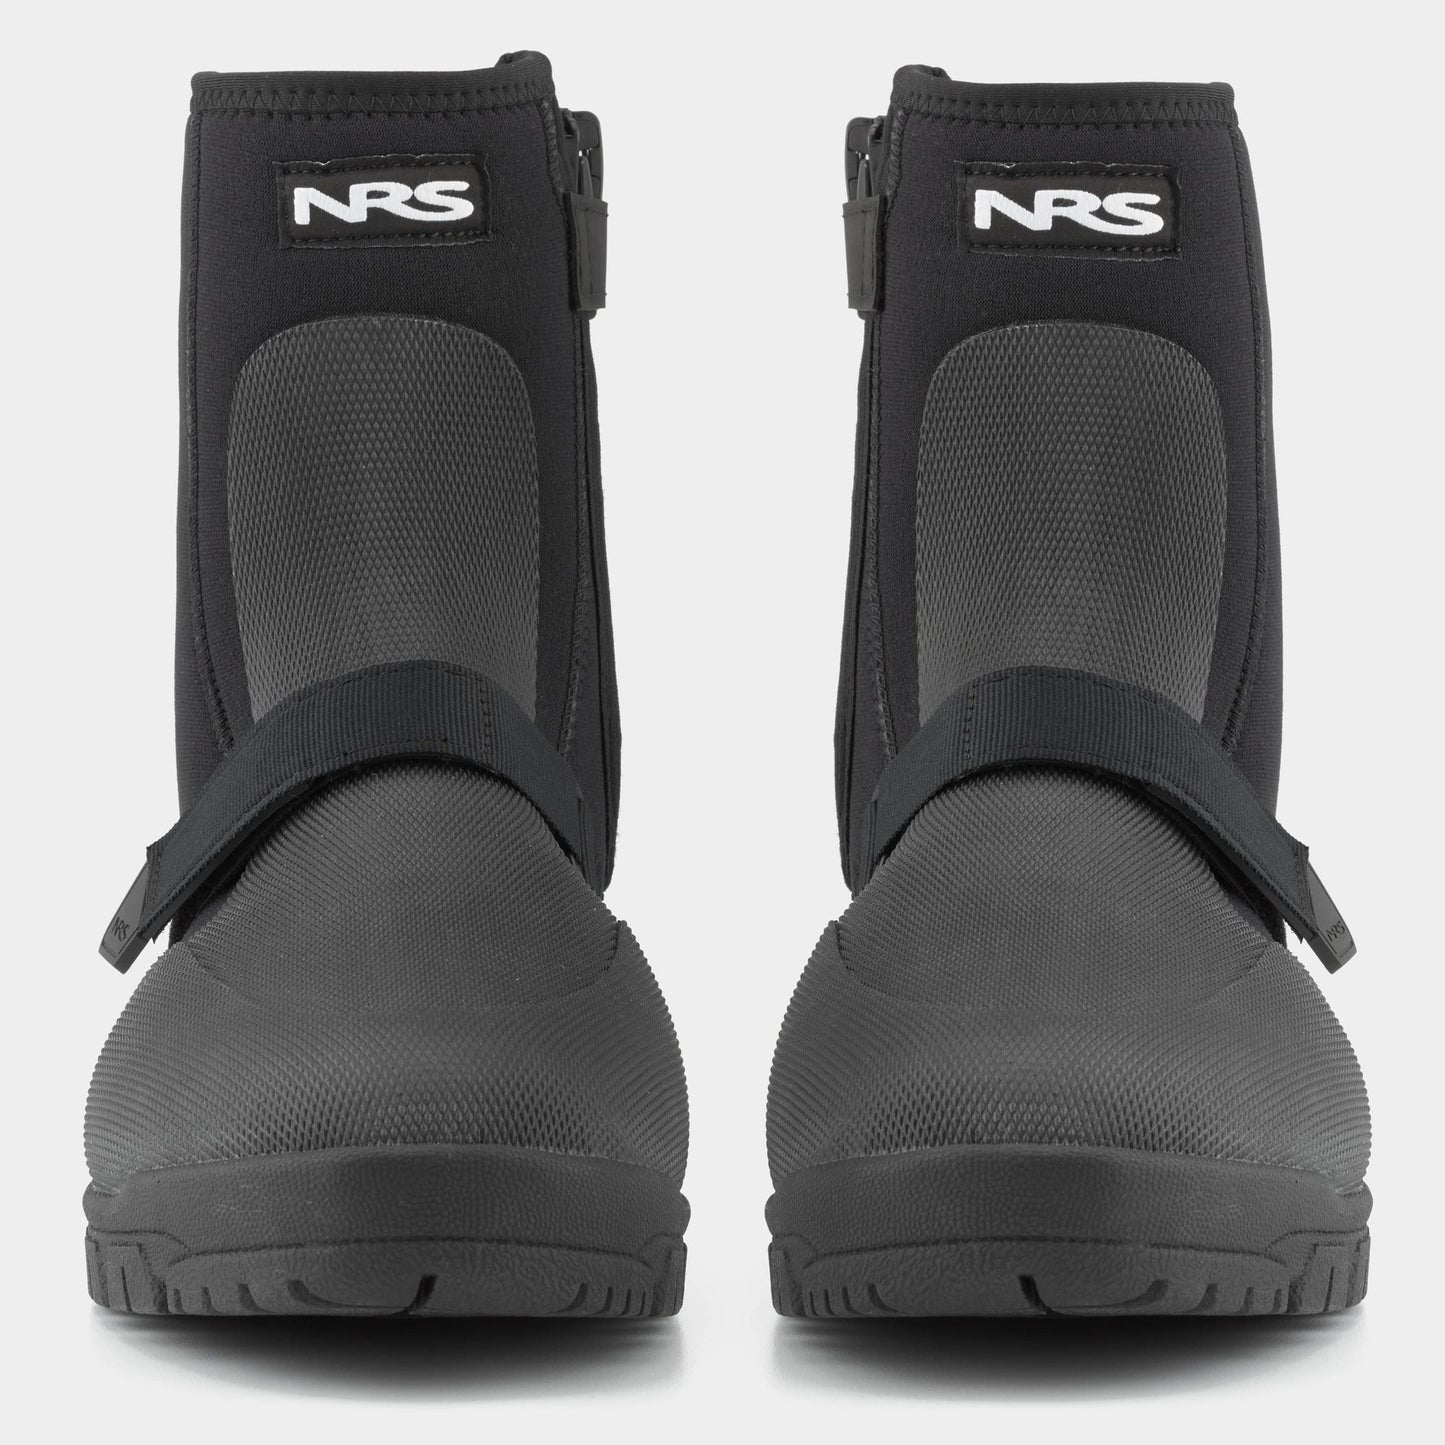 NRS ATB Wetshoes - New Design